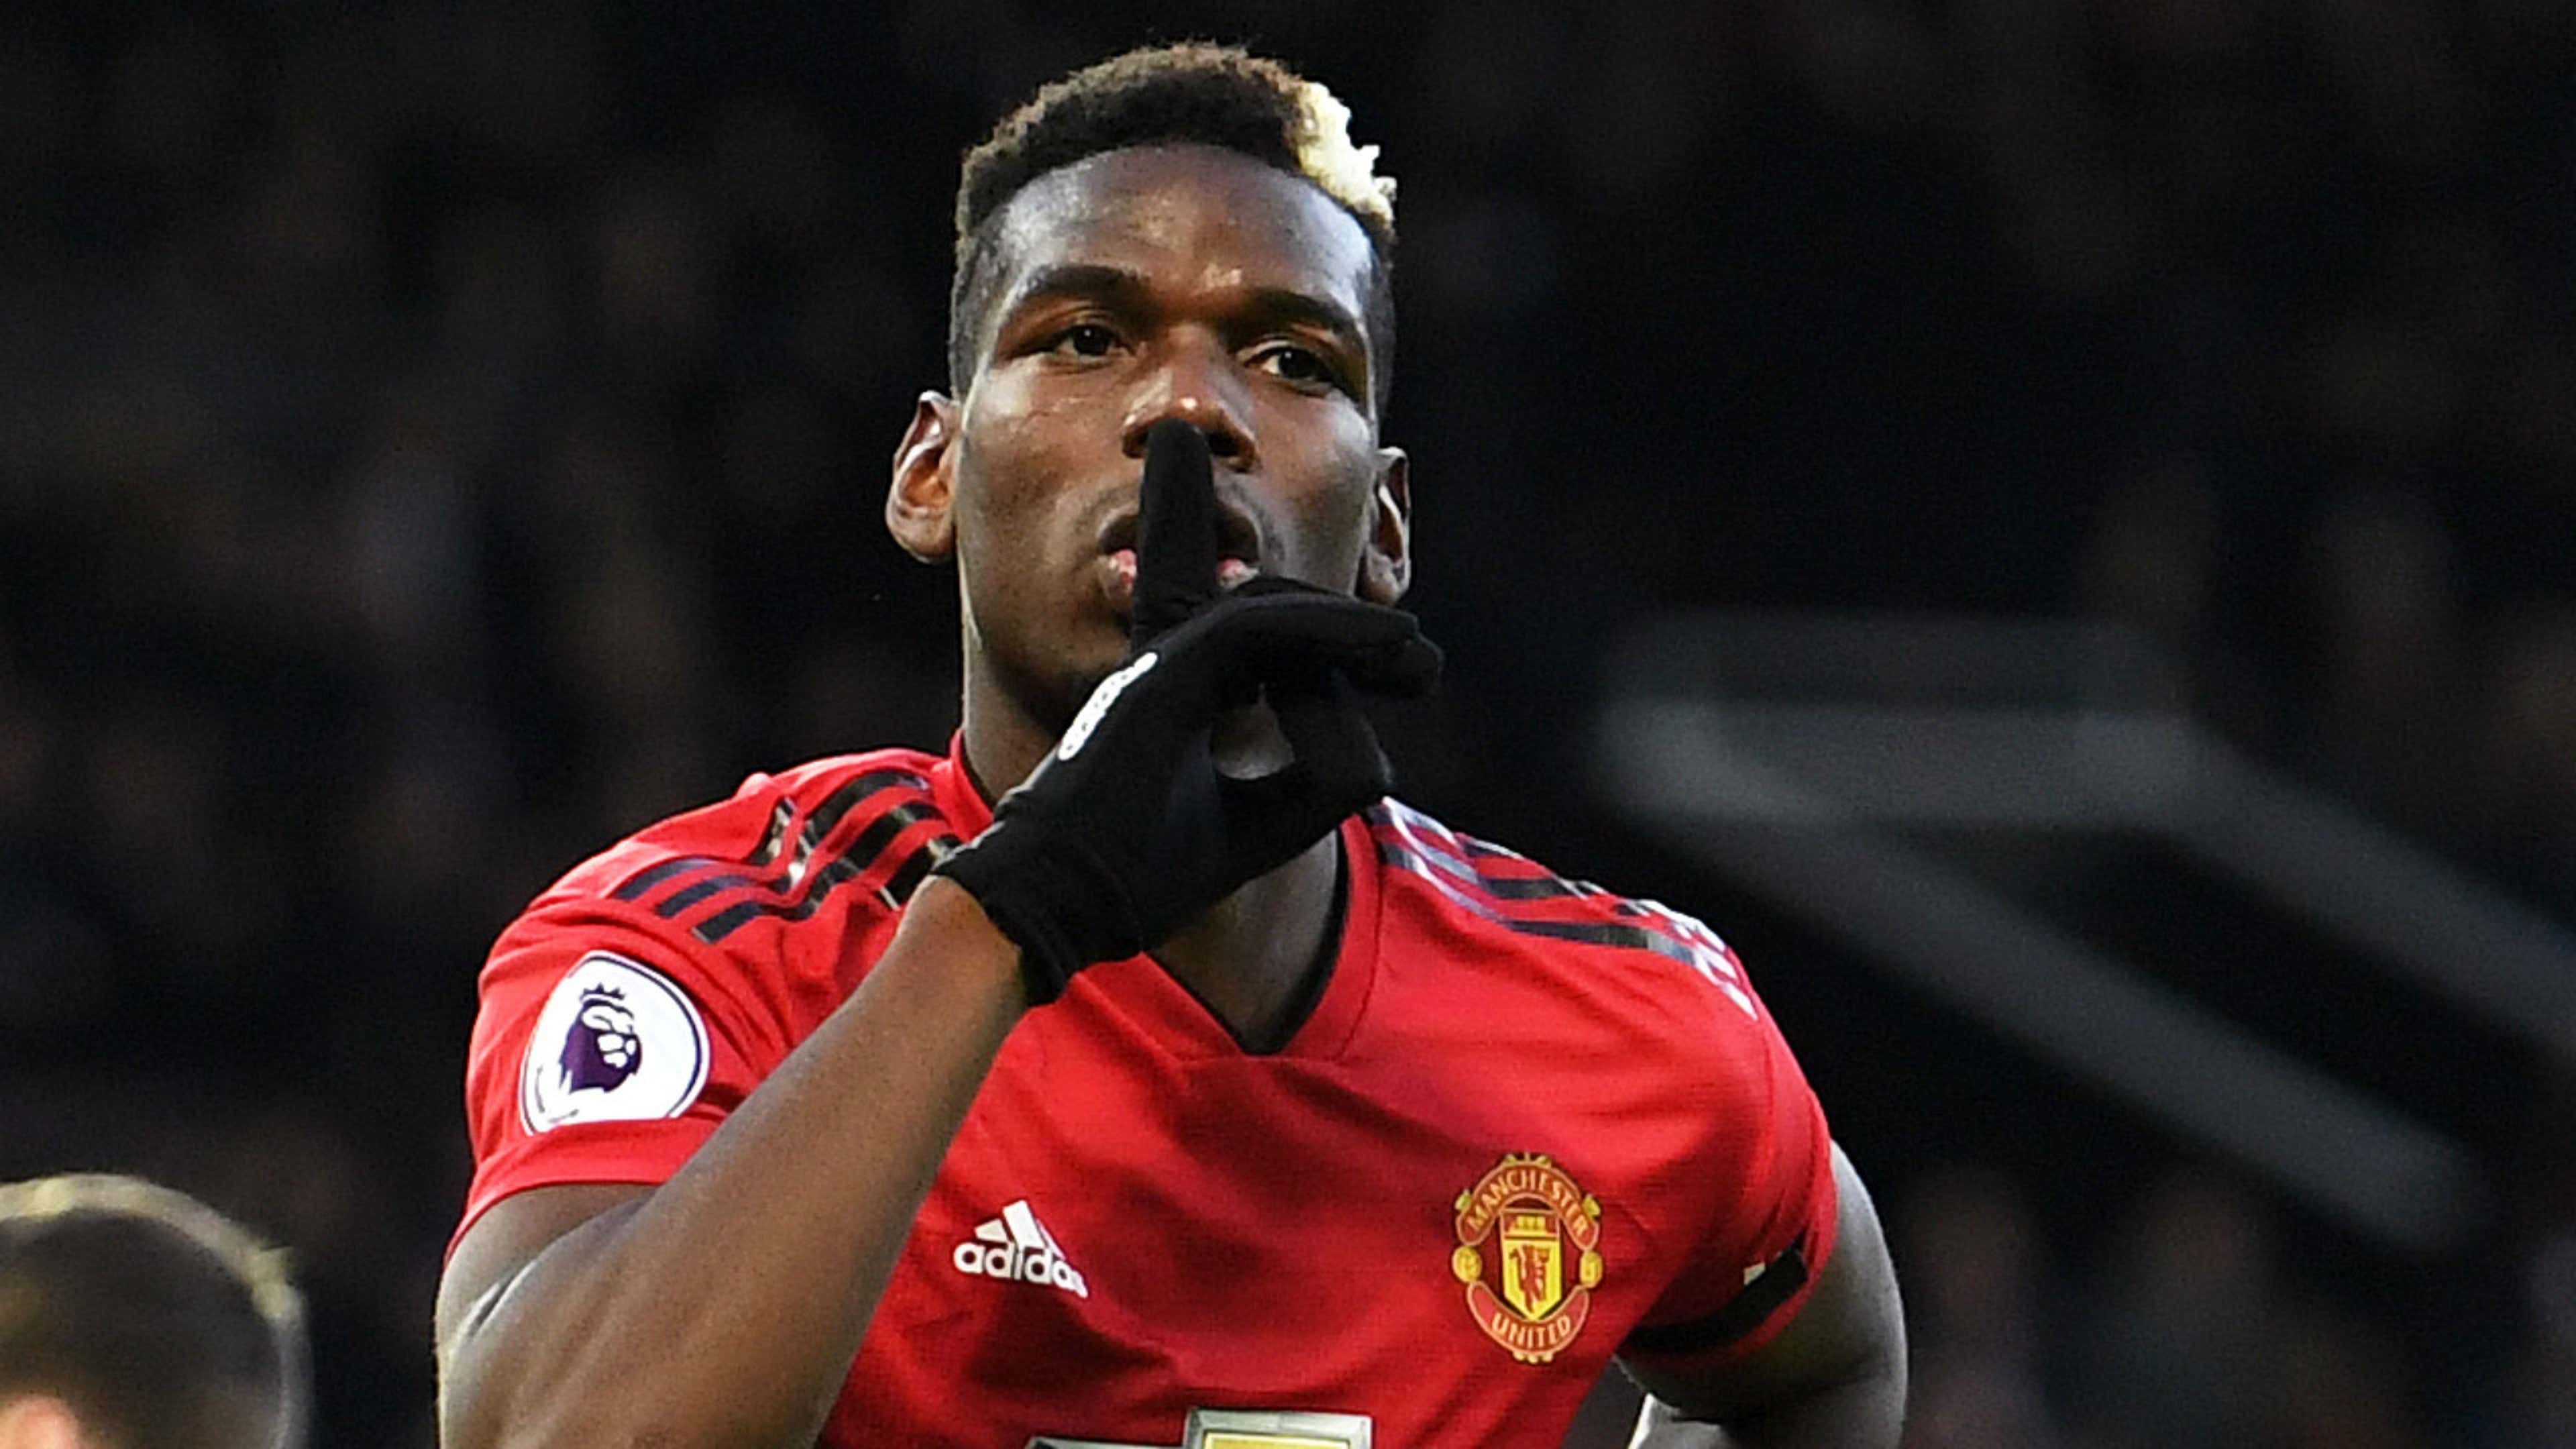 Manchester United news: Paul Pogba will be pushing for move to Real Madrid, says Andrei Kanchelskis | Goal.com